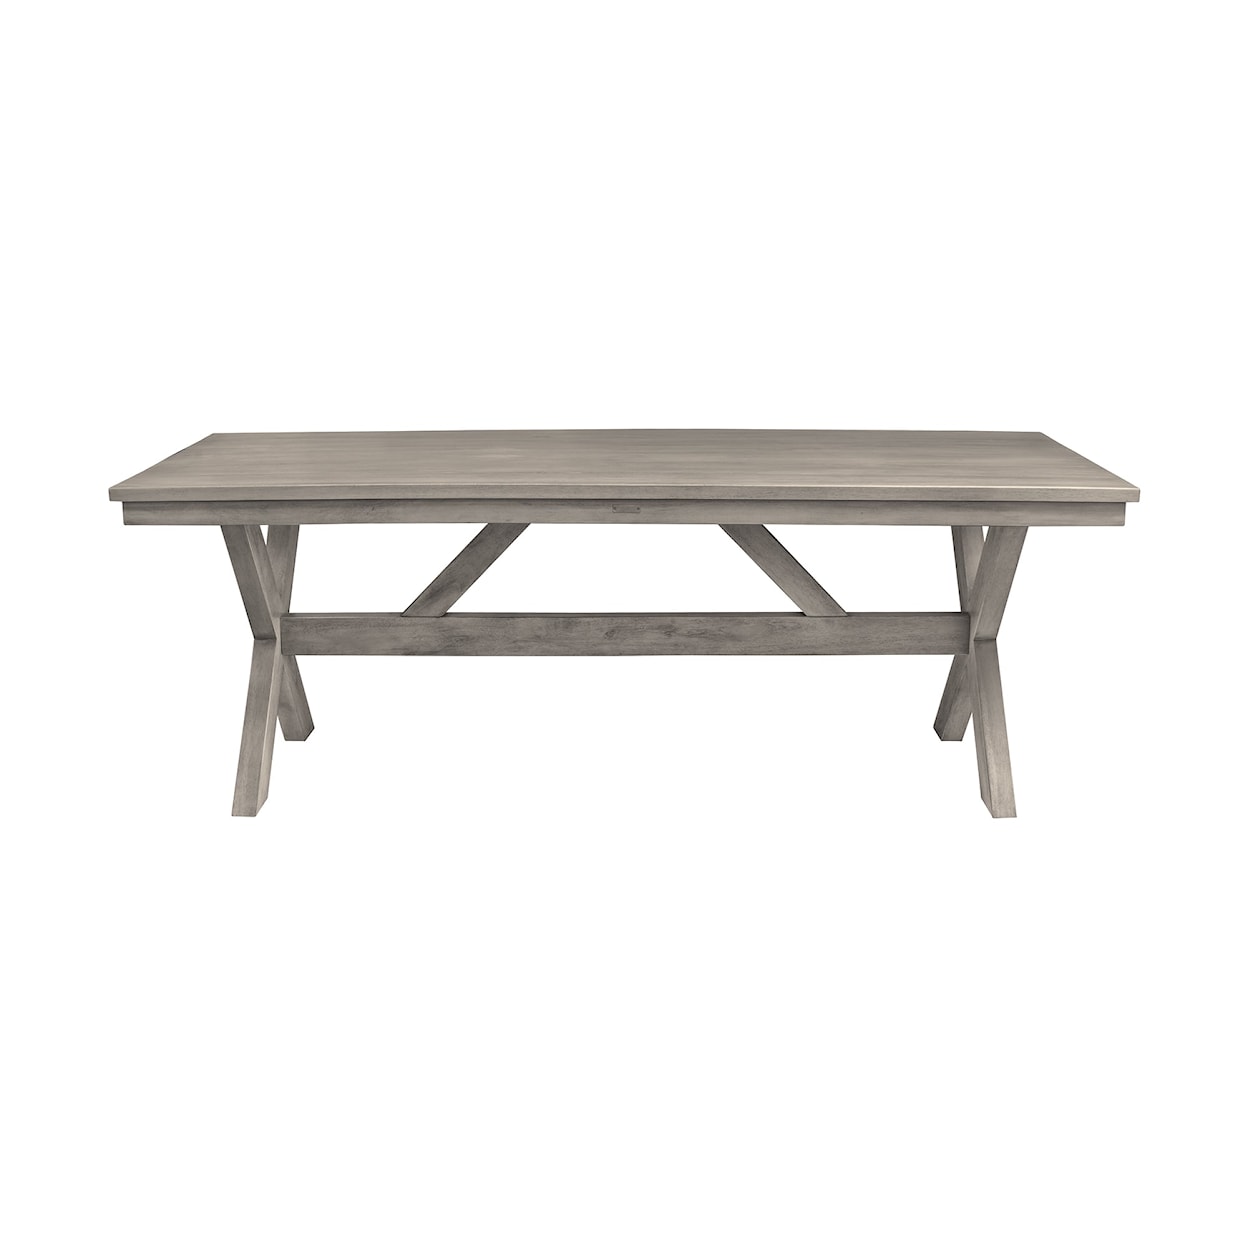 Armen Living Costa Outdoor Dining Table